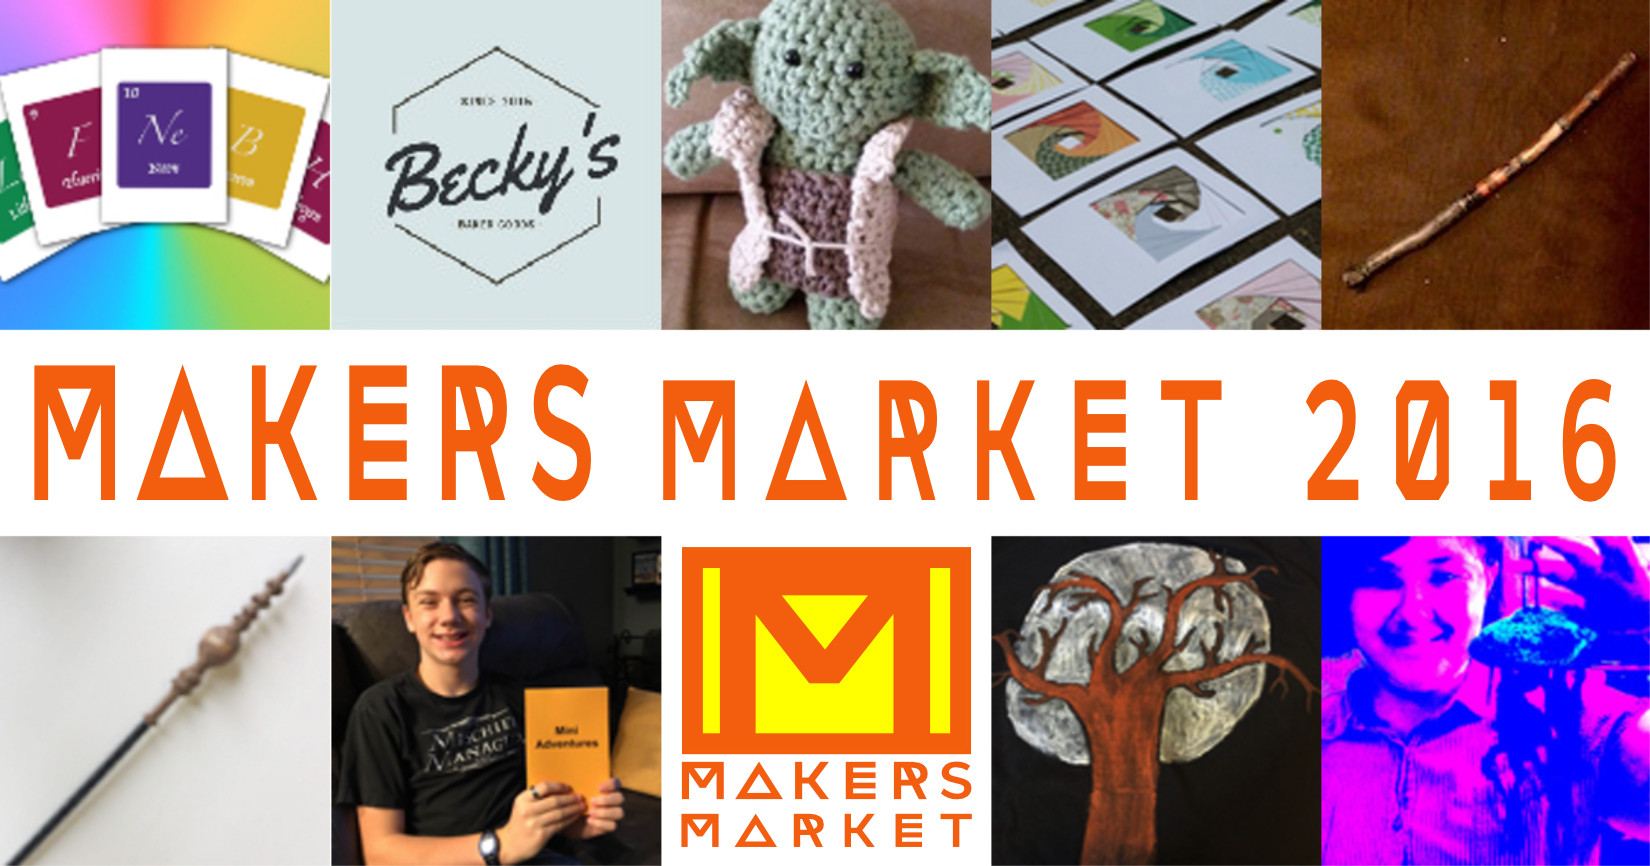 Makers Market 2016 booths